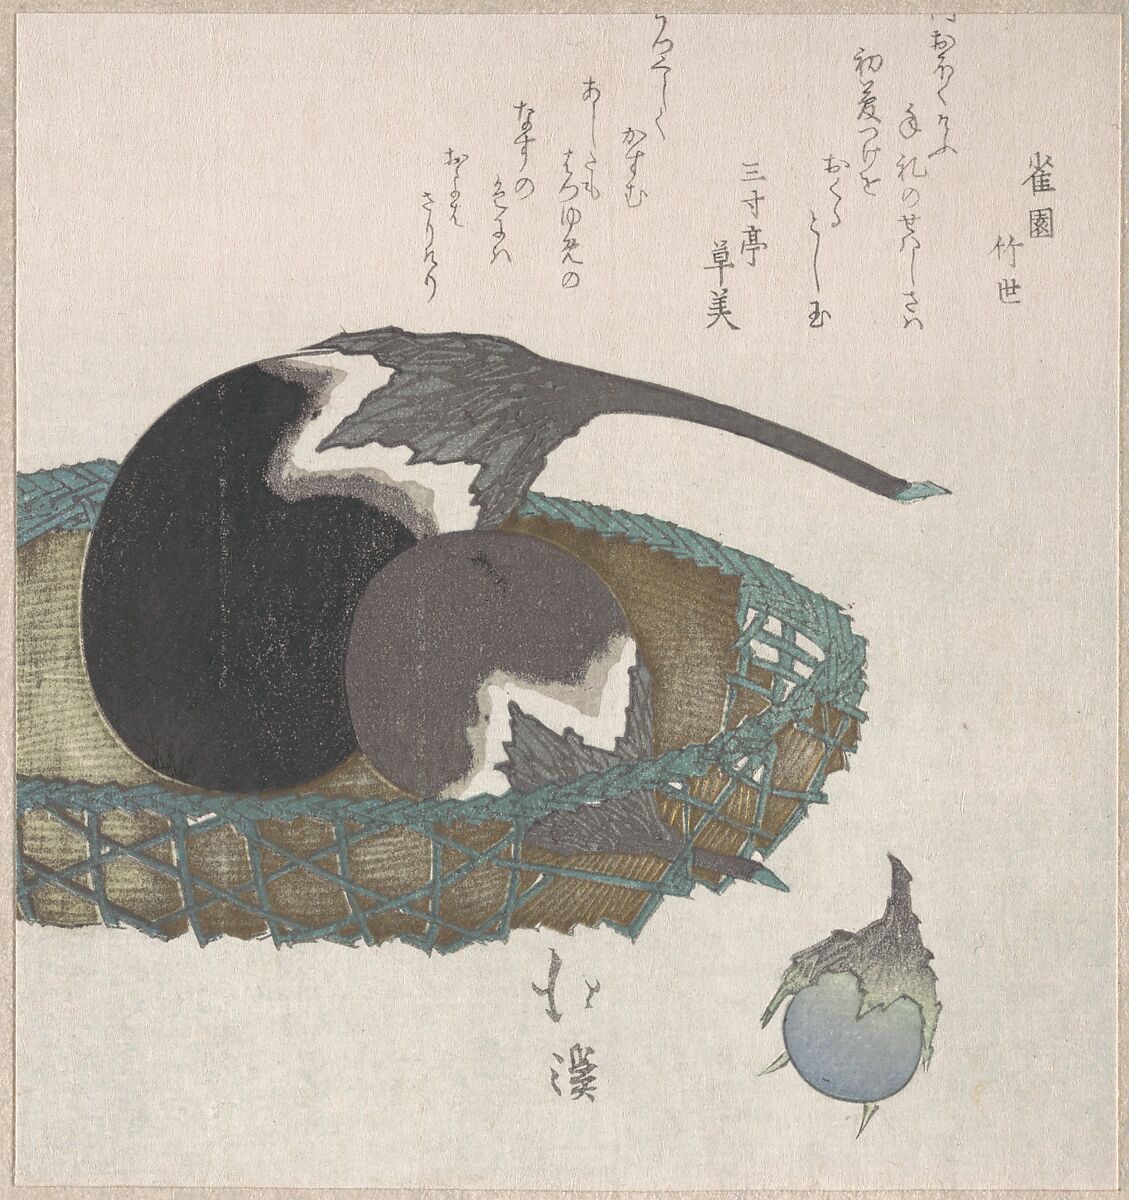 Eggplants in a Basket, Totoya Hokkei (Japanese, 1780–1850), Part of an album of woodblock prints (surimono); ink and color on paper, Japan 